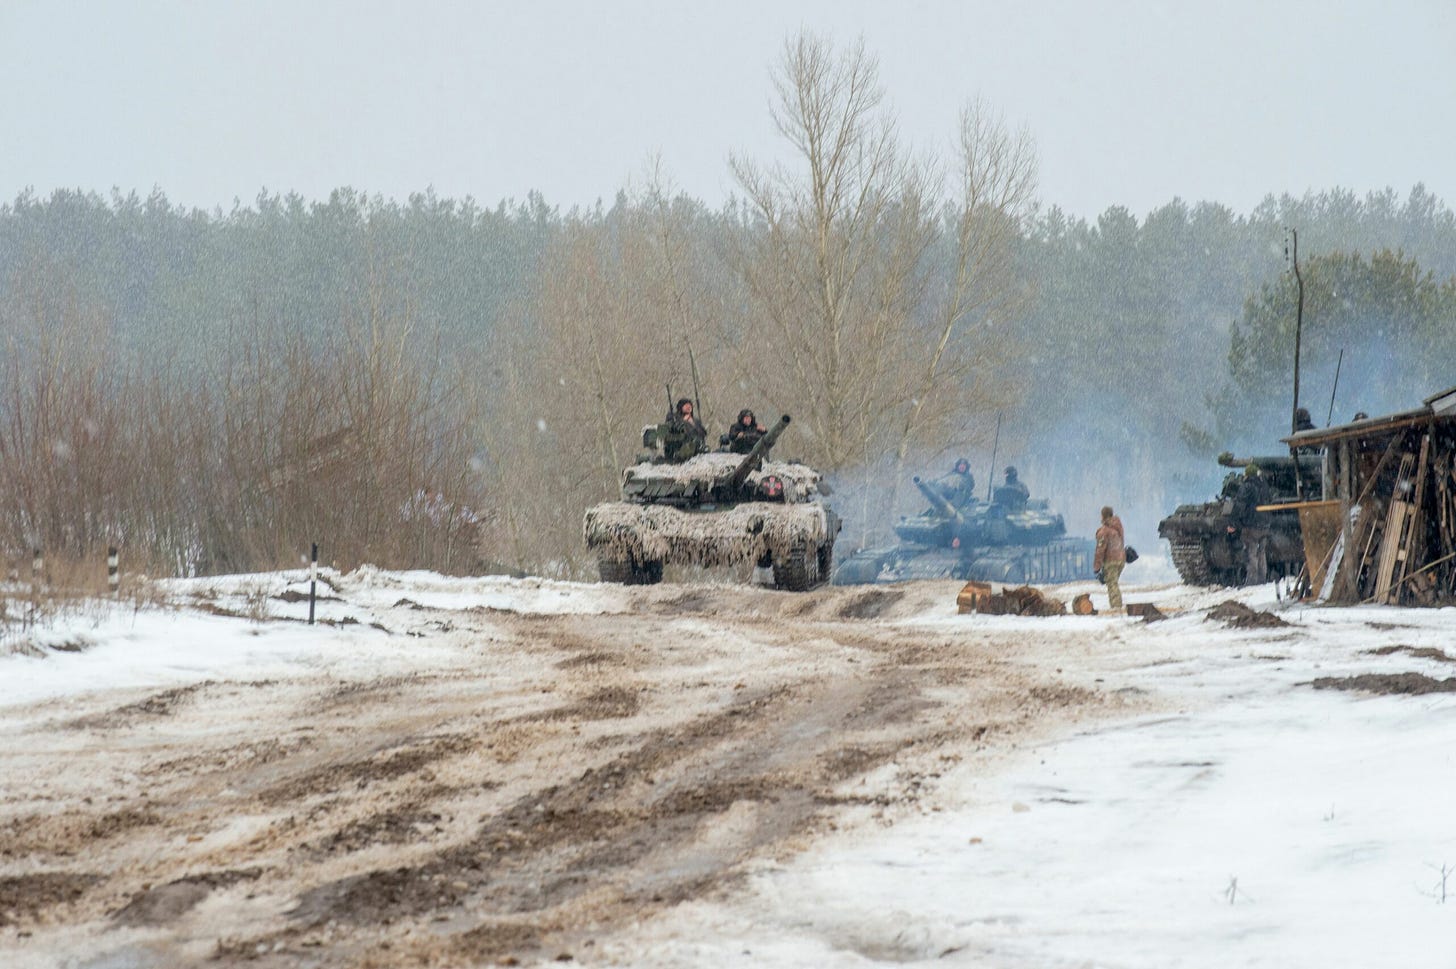 Ukrainian Military Forces servicemen of the 92nd mechanized brigade use tanks, self-propelled guns and other armored vehicles to conduct live-fire exercises near the town of Chuguev, in the Kharkiv region, on Feb. 10, 2022. Credit: Sergey Bobok/AFP via Getty Images